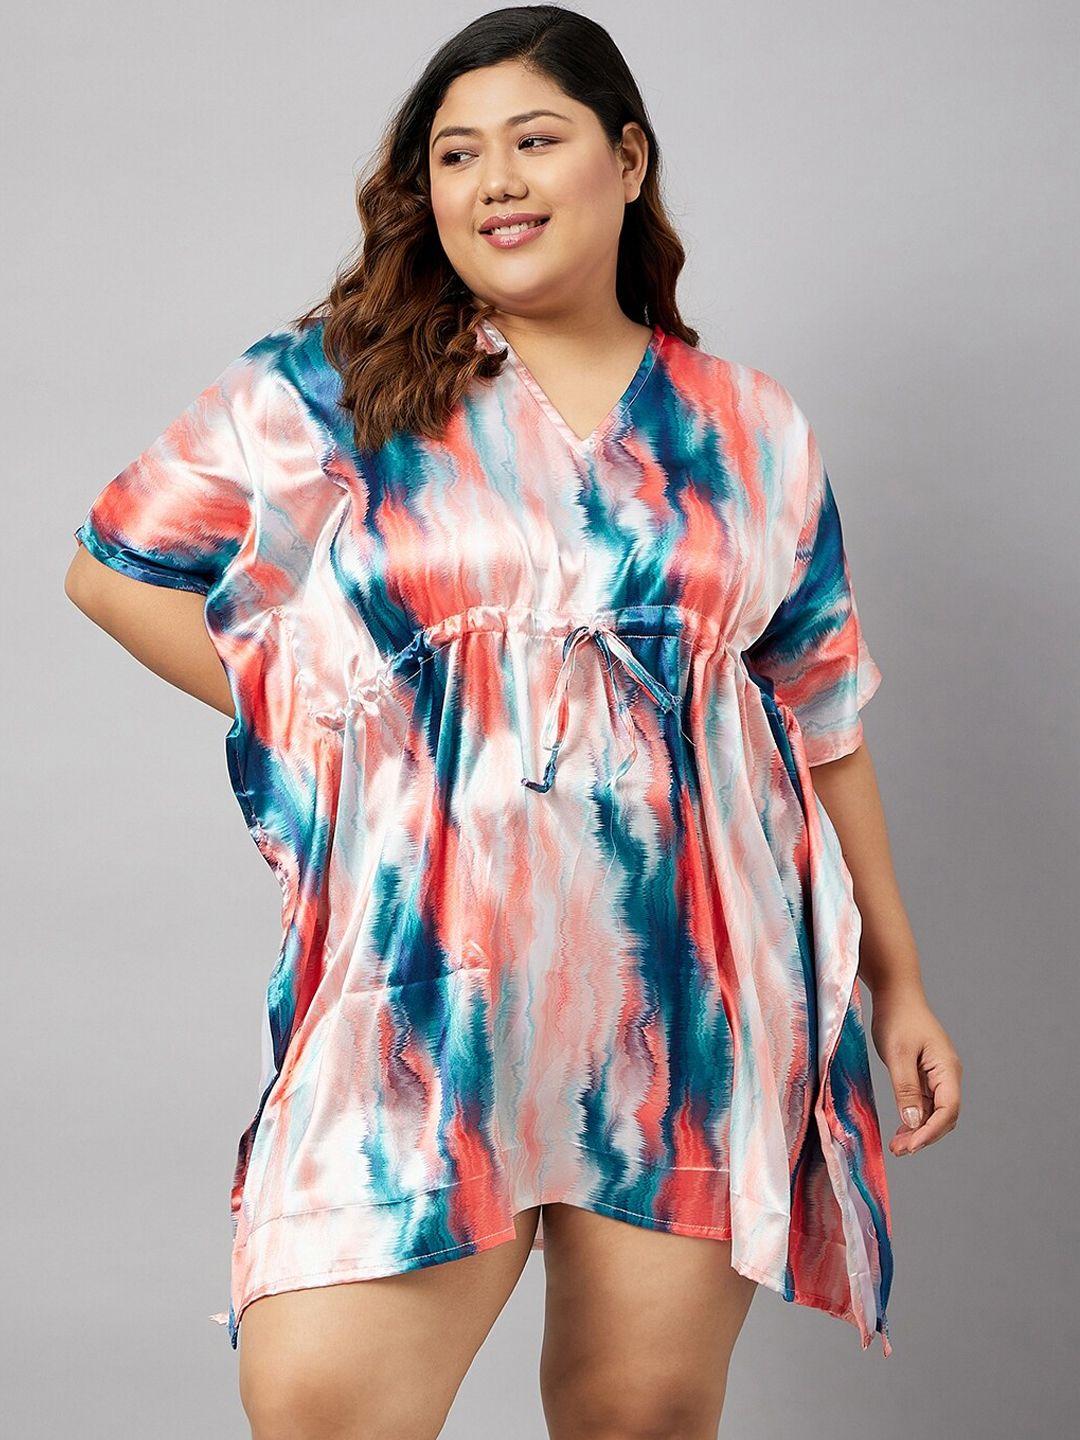 curves by zerokaata women abstract printed plus size kaftan cover up dress